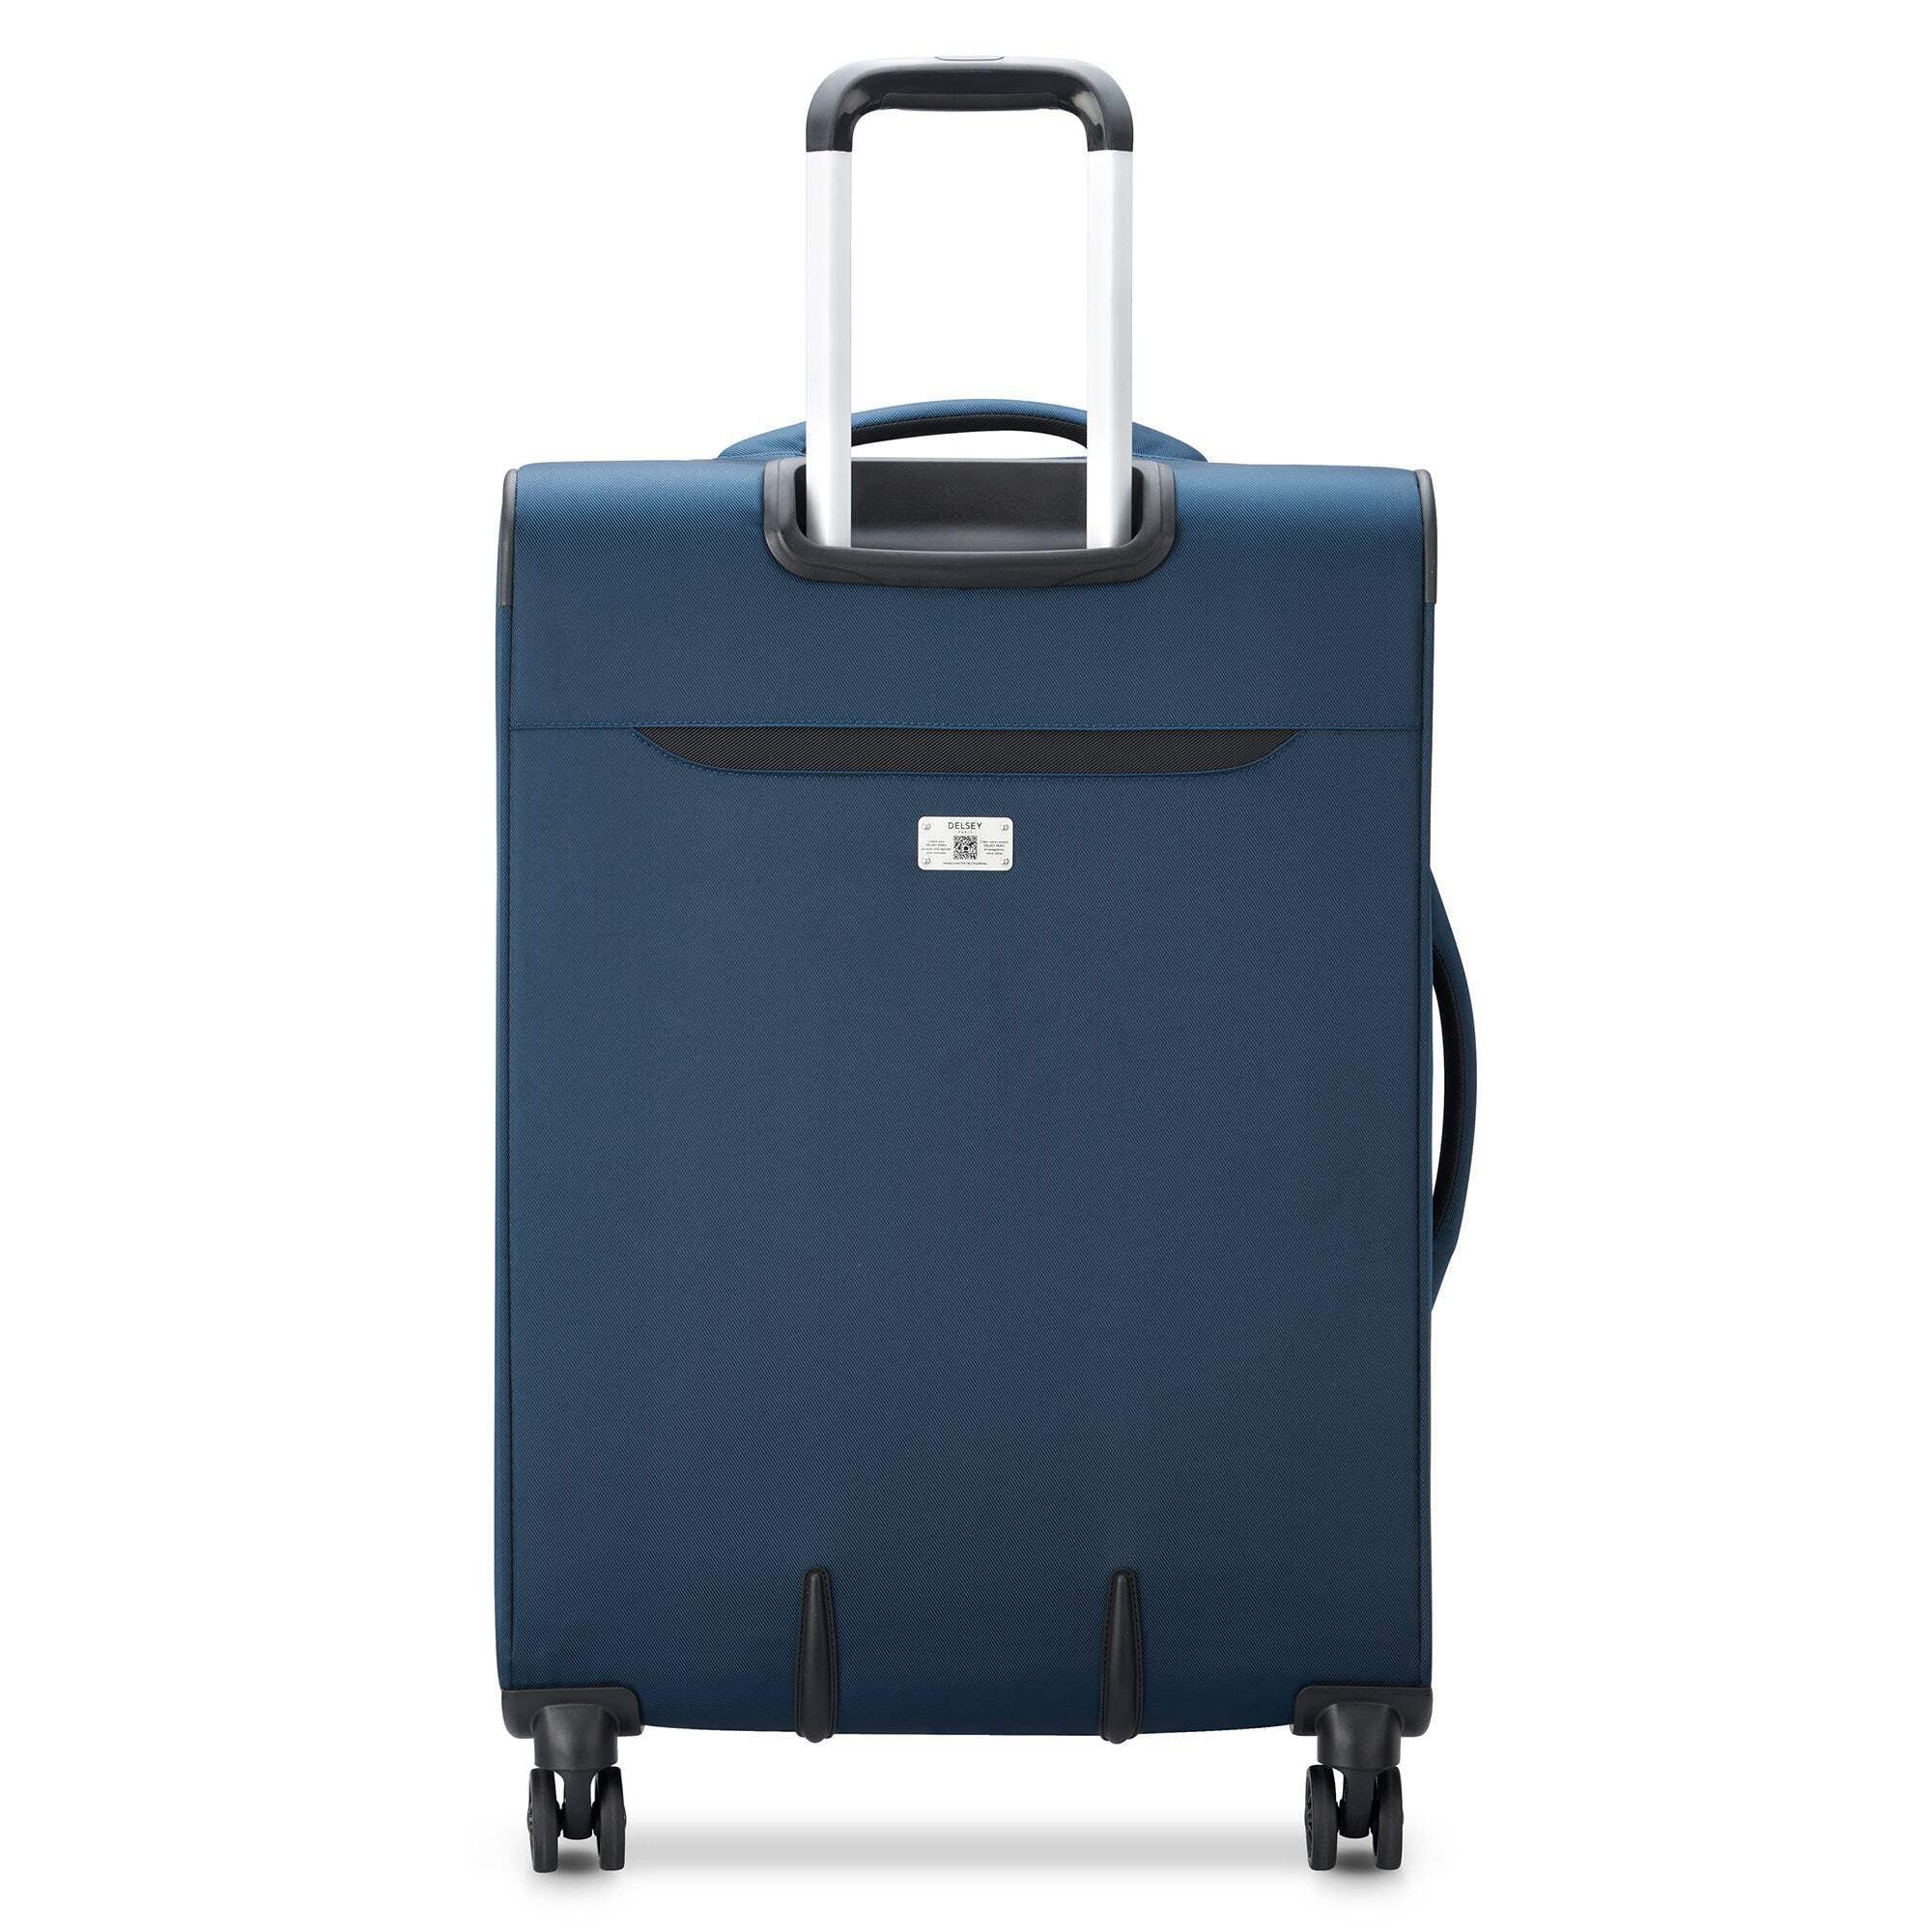 Pronto Cyprus ABS 4W Spinner Check In Luggage Trolley Bag (78 cm, Grey)  Price - Buy Online at Best Price in India